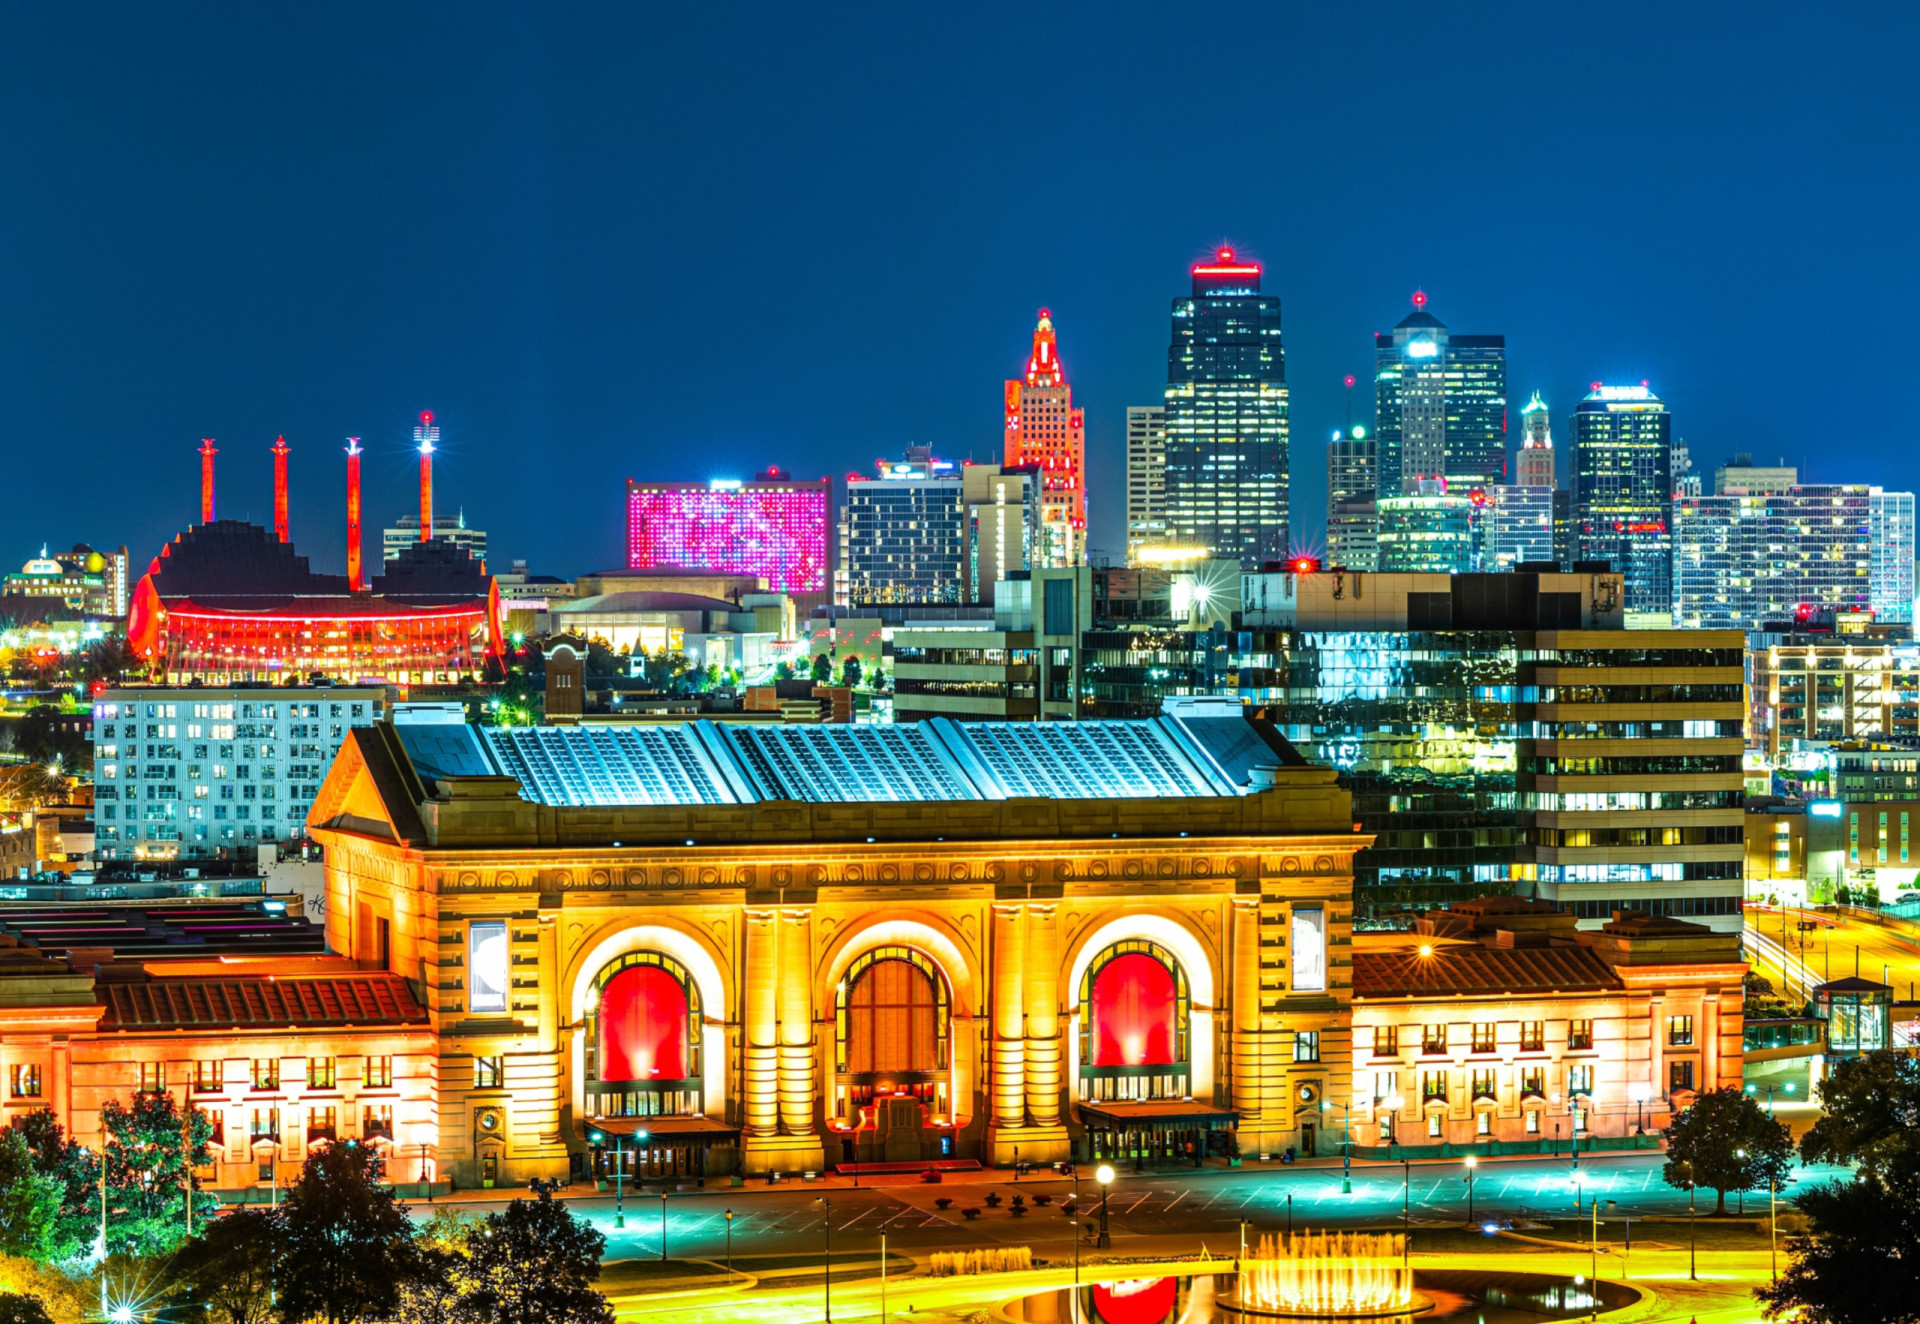 <p>Kansas City, Missouri, is currently in the celebrity spotlight after the pairing of Taylor Swift and Travis Kelce, tight end for the Kansas City Chiefs. In March 2024, the city will celebrate the opening of the first-ever purpose-built stadium for women's pro sports. Visitors can also look forward to a string of new hotel and shopping facilities, including the brand new Rock Island Bridge entertainment complex.</p><p>You may also like:<a href="https://www.starsinsider.com/n/433536?utm_source=msn.com&utm_medium=display&utm_campaign=referral_description&utm_content=636762en-en"> The 30 worst habits when you're stuck at home</a></p>